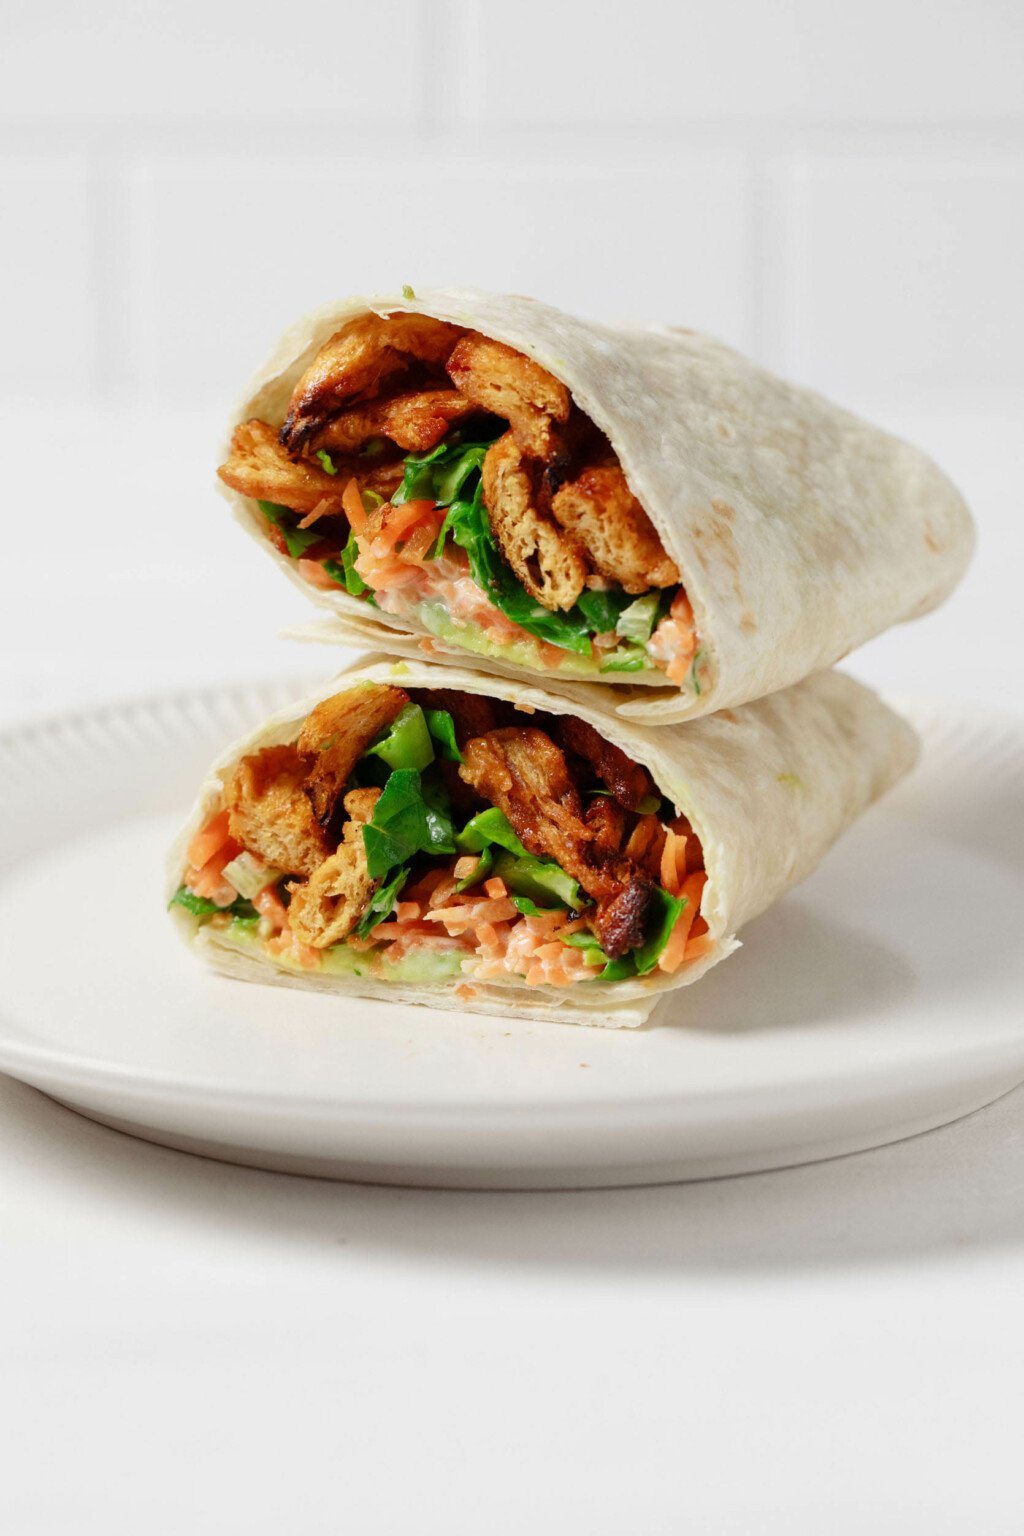 A vegan buffalo "chicken" wrap, made with plant-based soy curls, has been cut open. The two halves are stacked on top of one another.